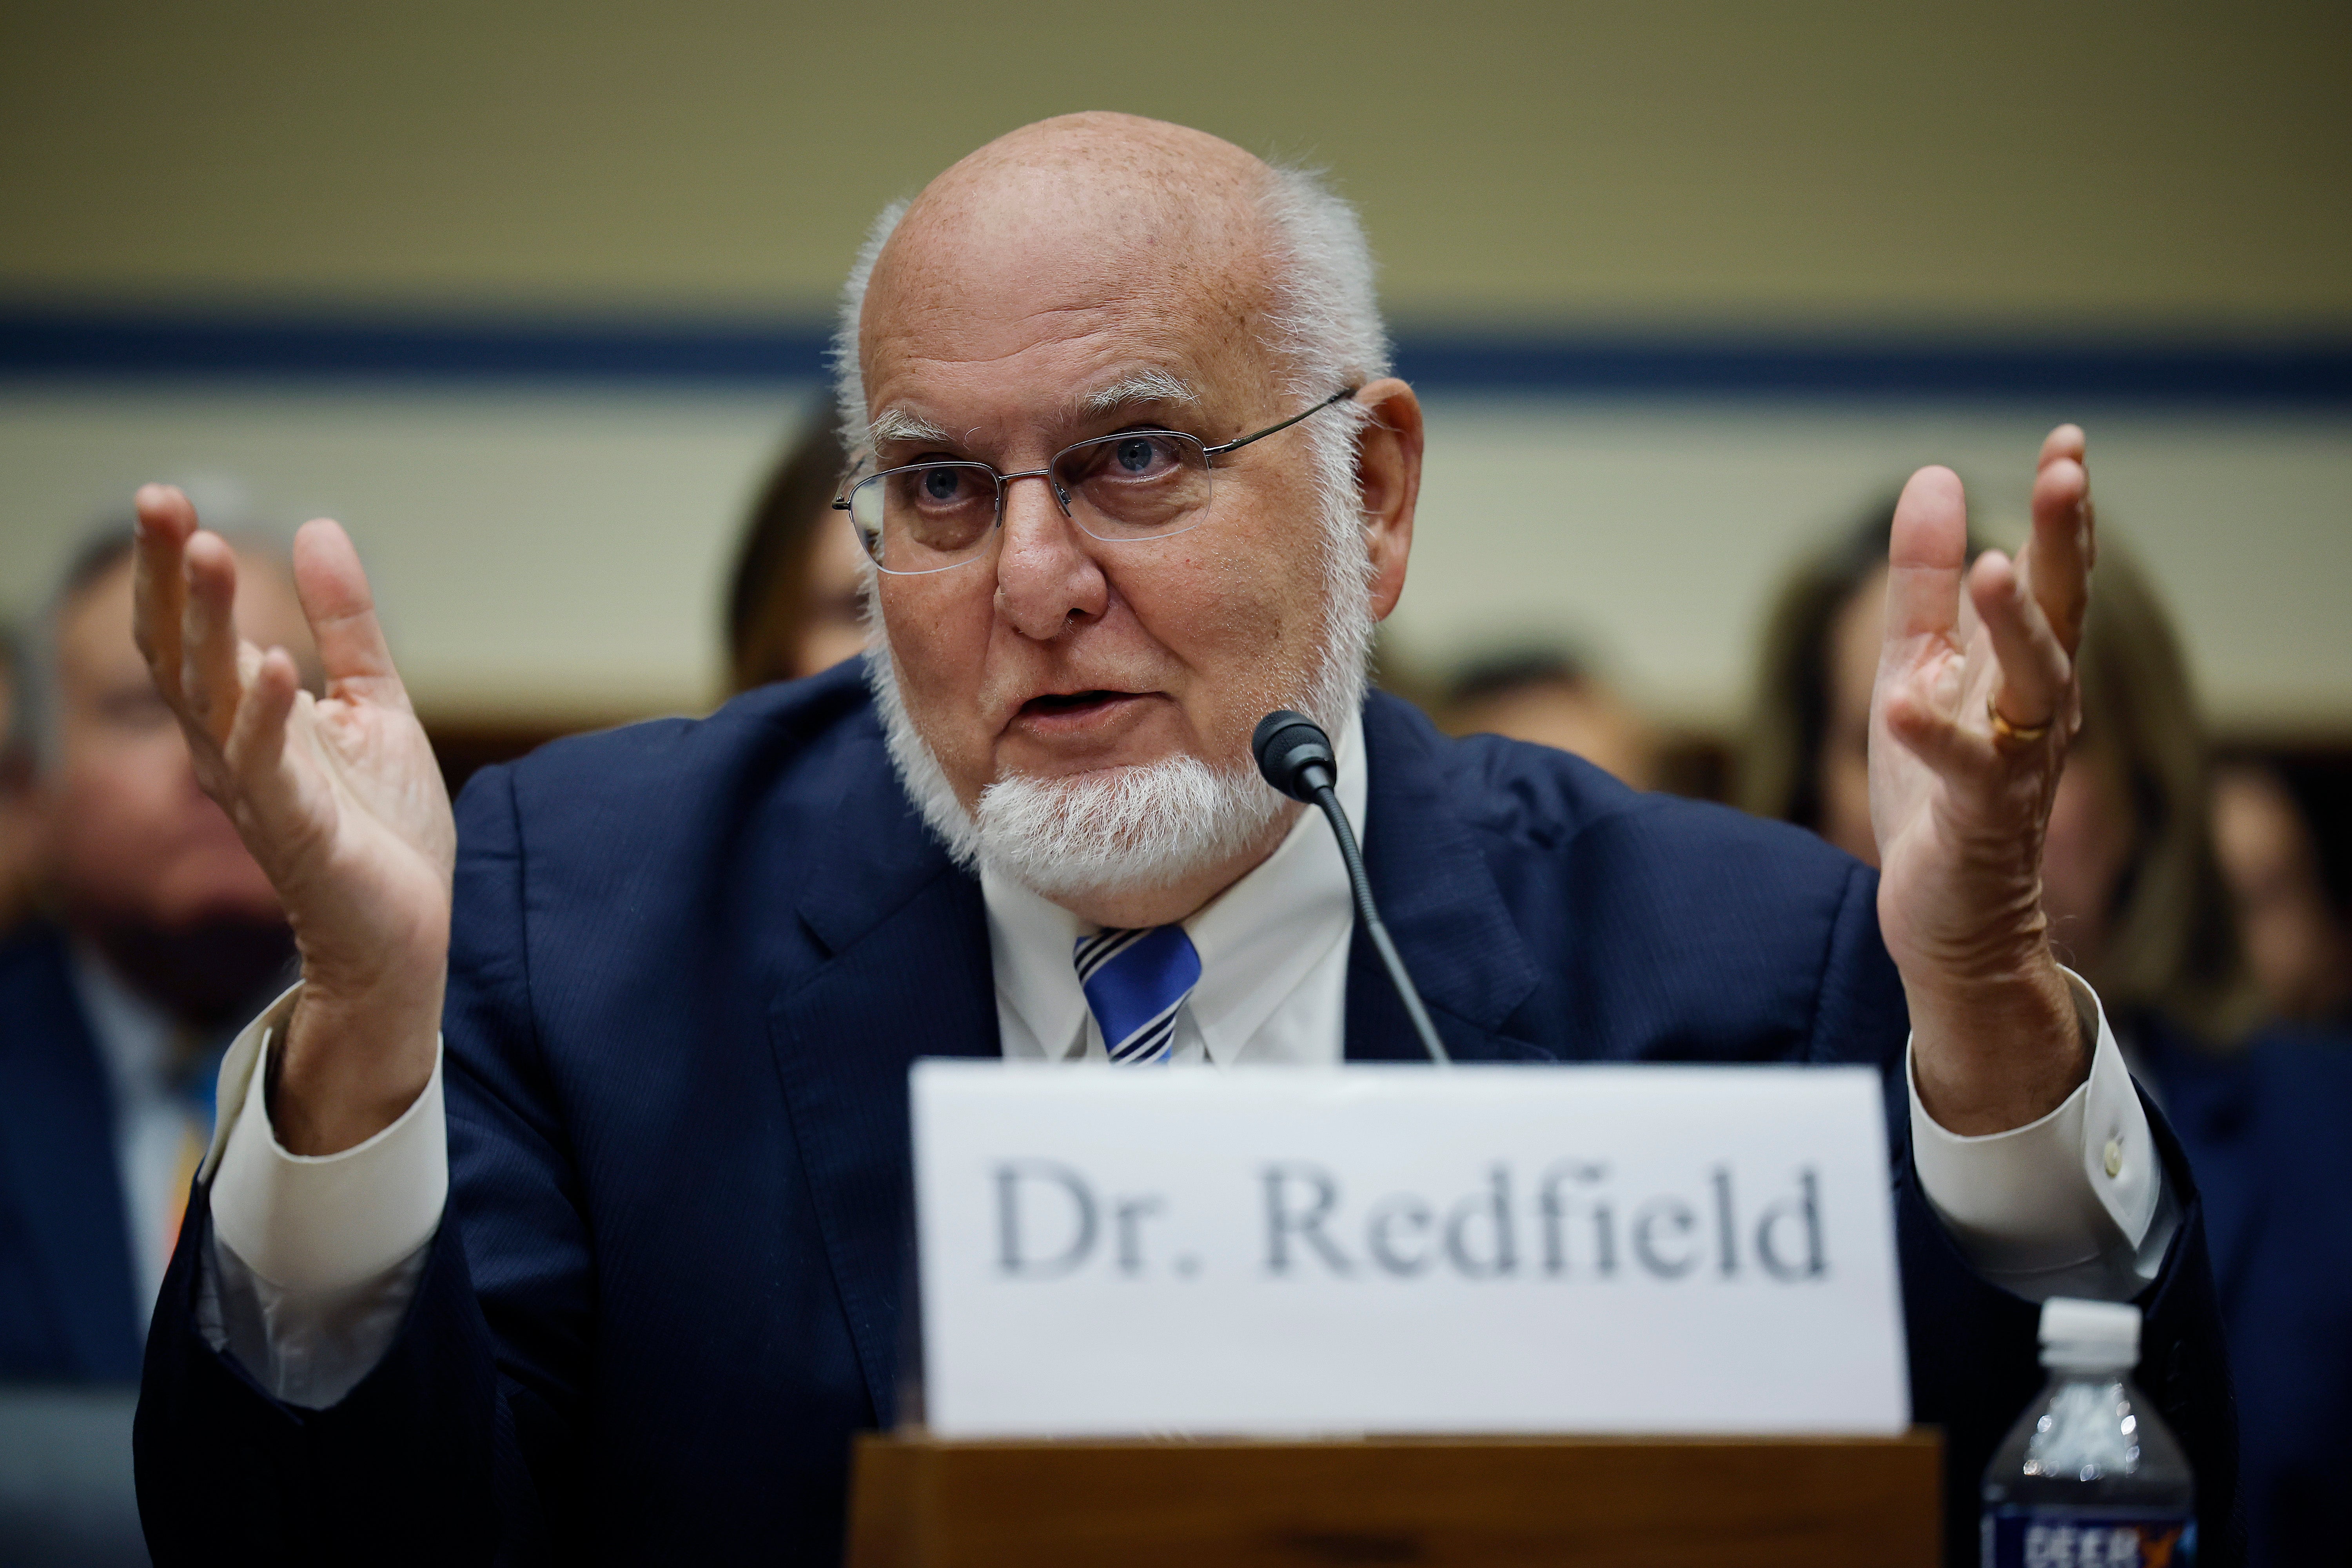 Former CDC director Dr Robert Redfield has said that the next pandemic is likely to be from bird flu